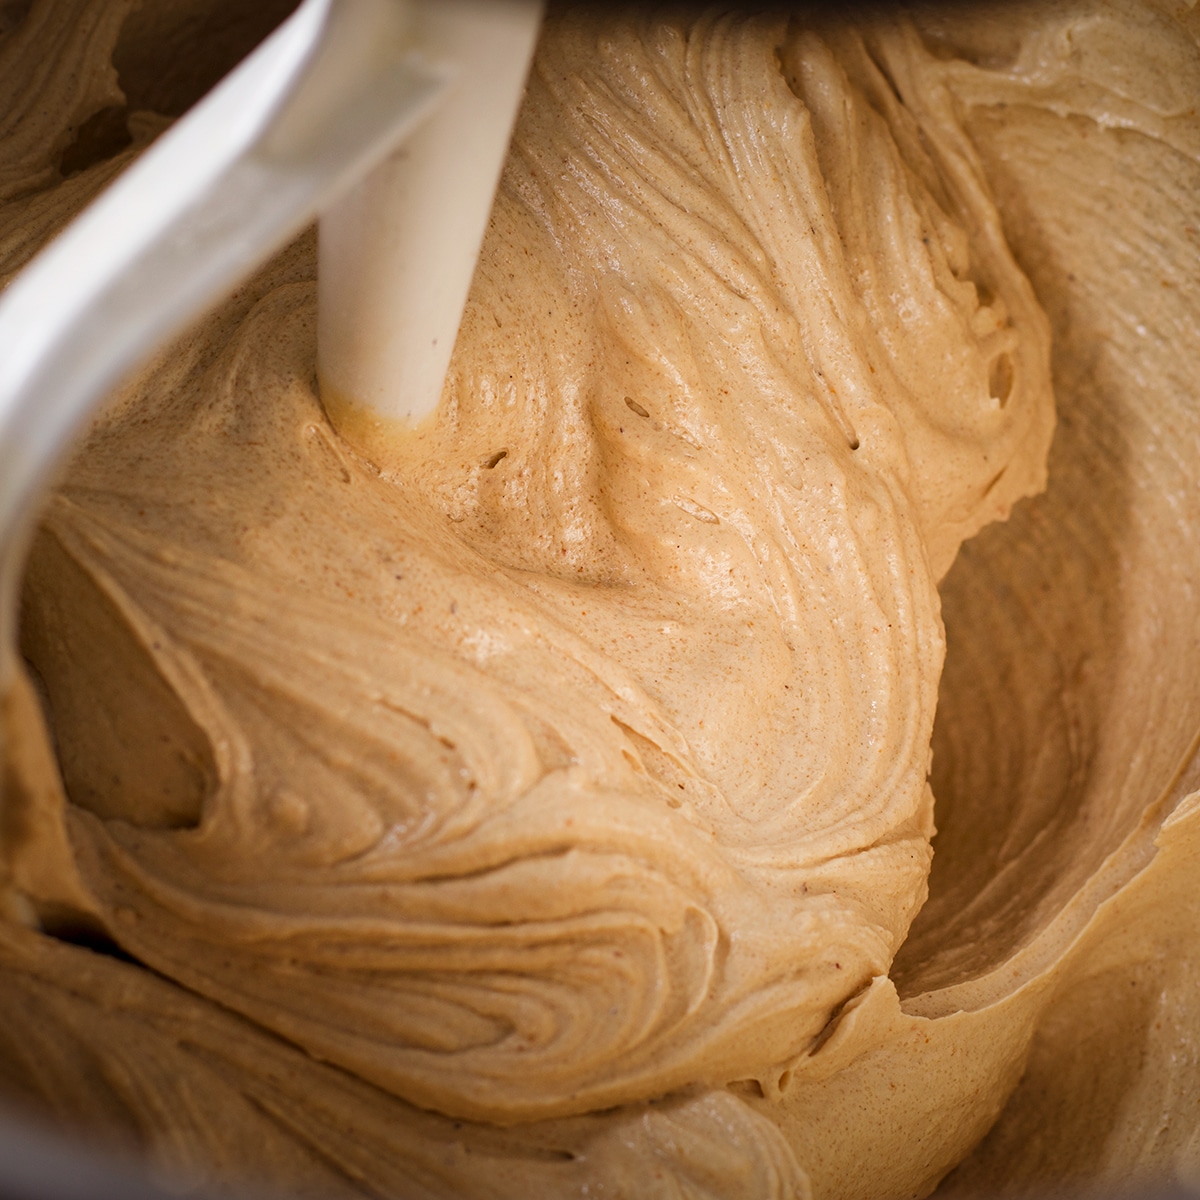 A stand mixer fitted with the paddle attachment mixing cookie dough.